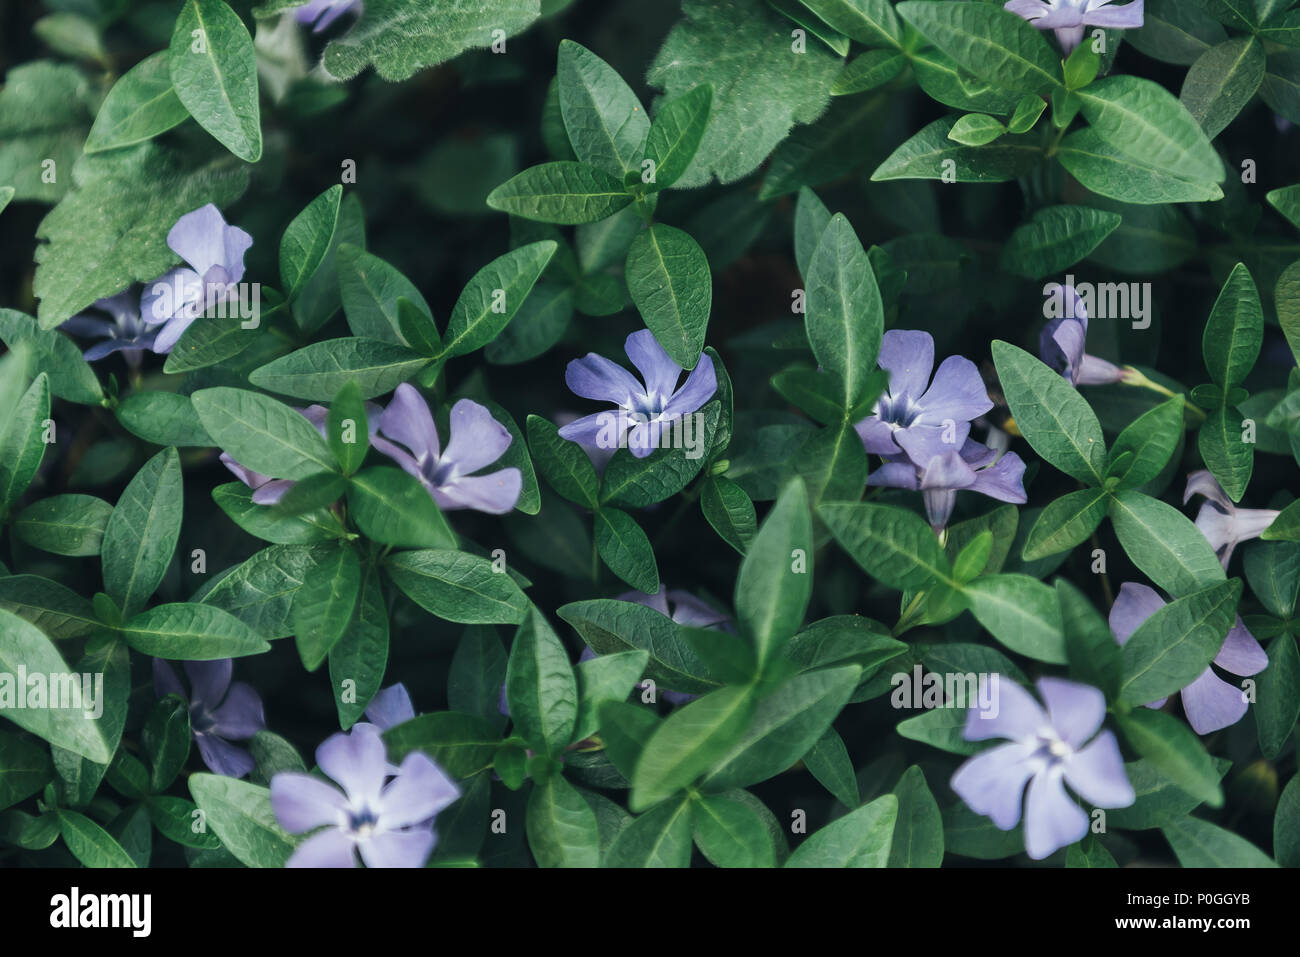 full frame image of periwinkles and green leaves Stock Photo